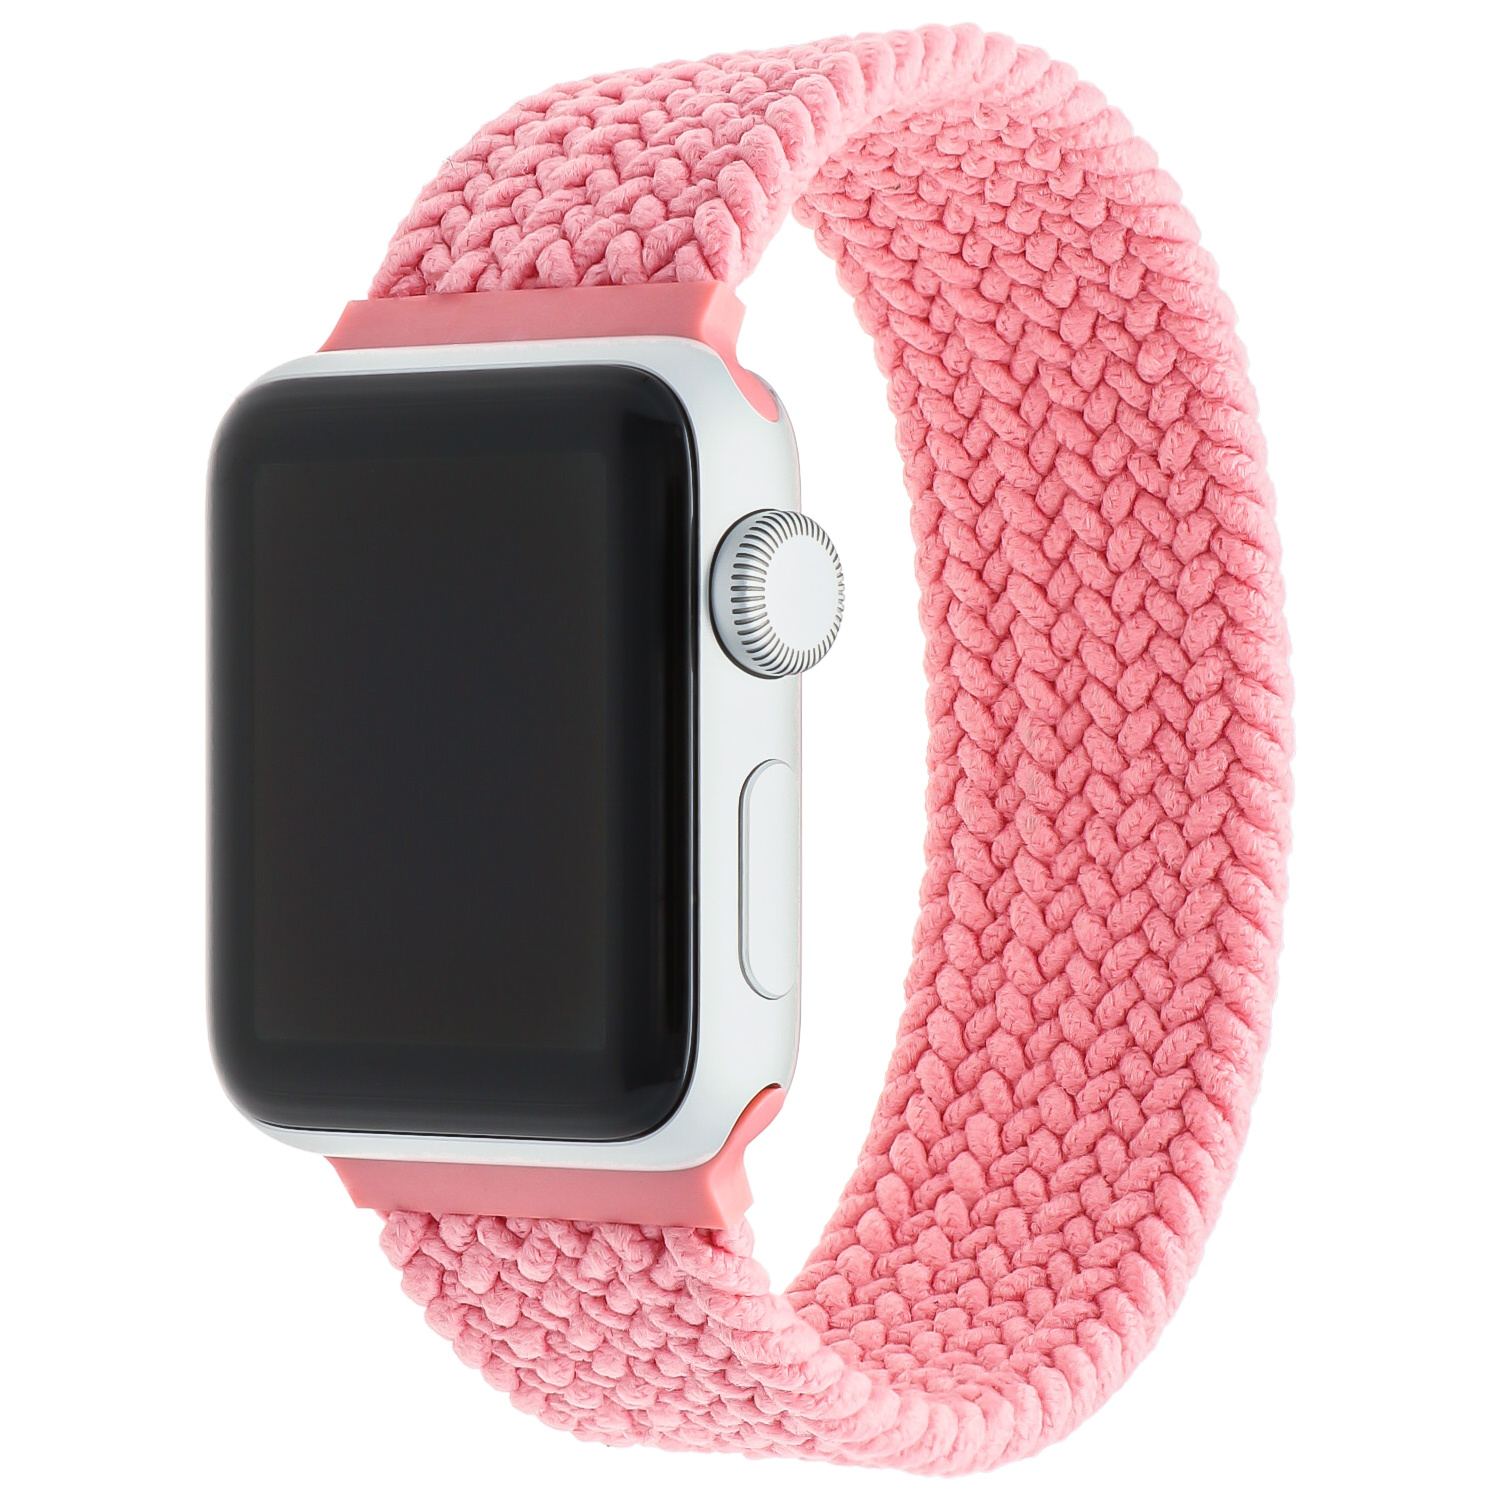 Apple Watch Nylon Braided Solo Loop Strap - Pink Punch